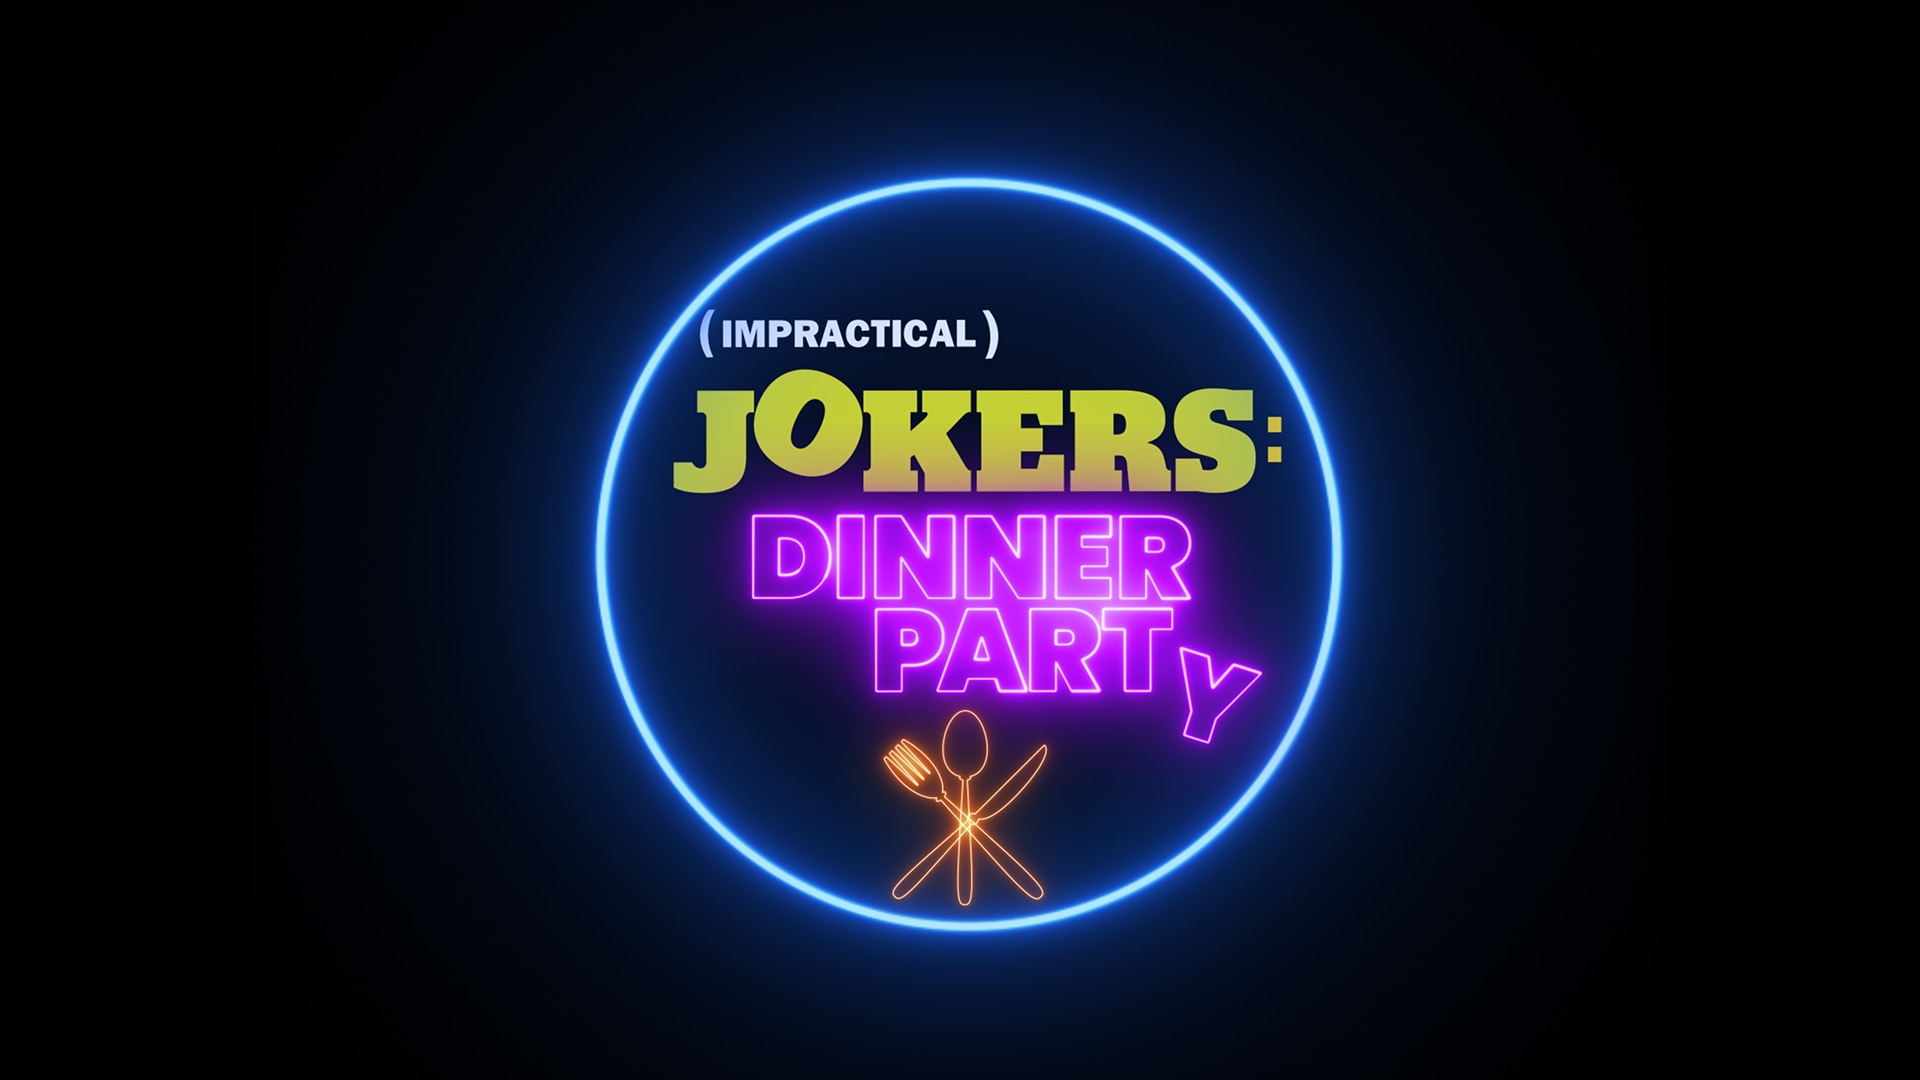 Luminescent Impractical Jokers: Dinner Party logo over black background.